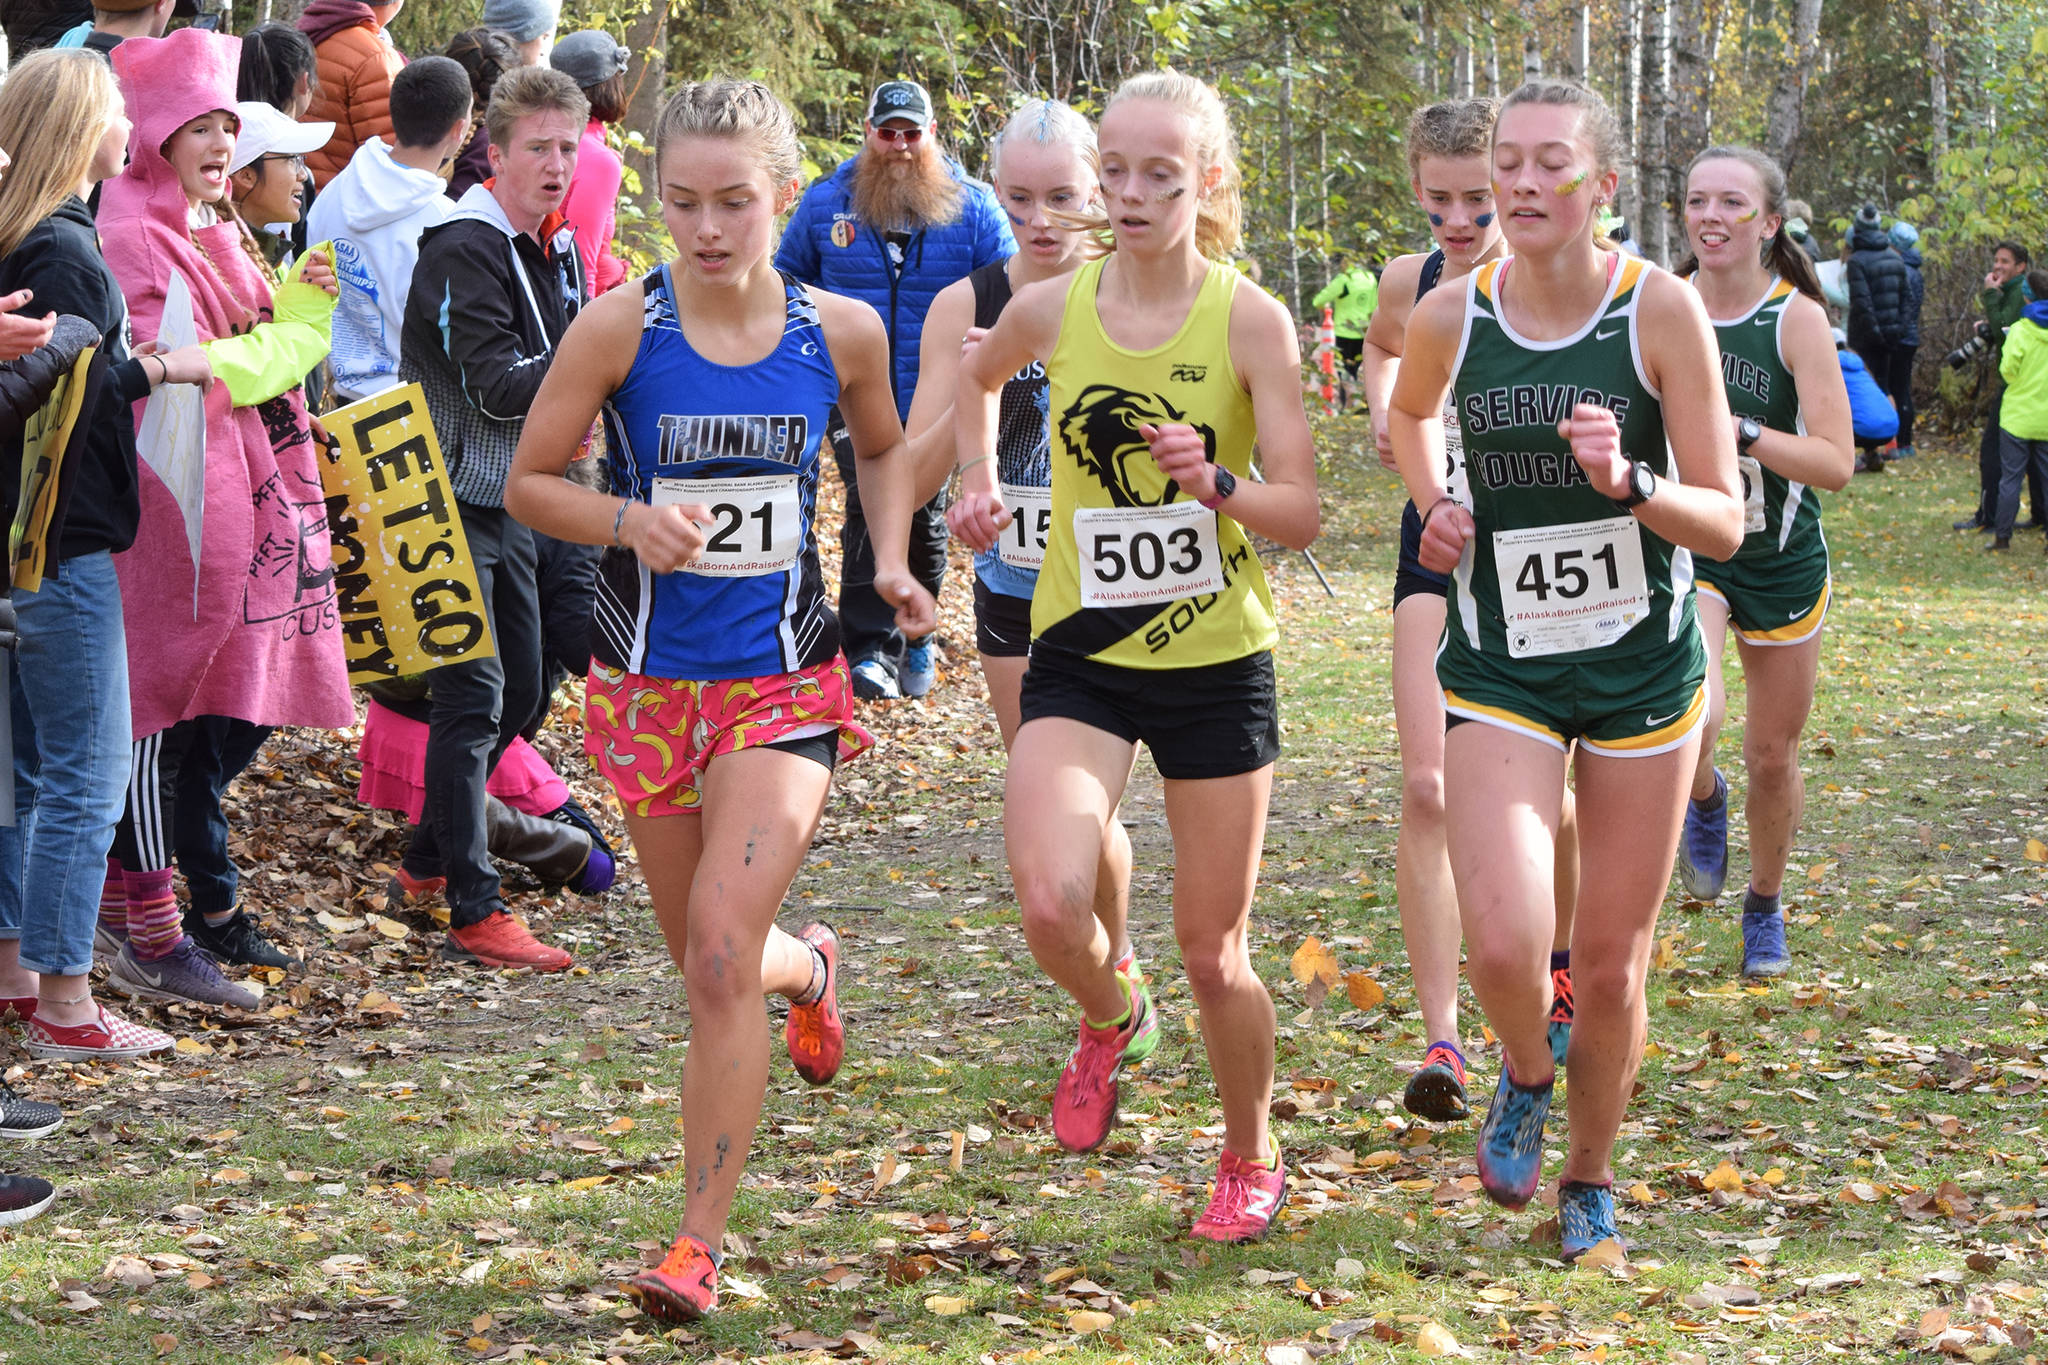 Juneau pair carves out top times at state XC meet